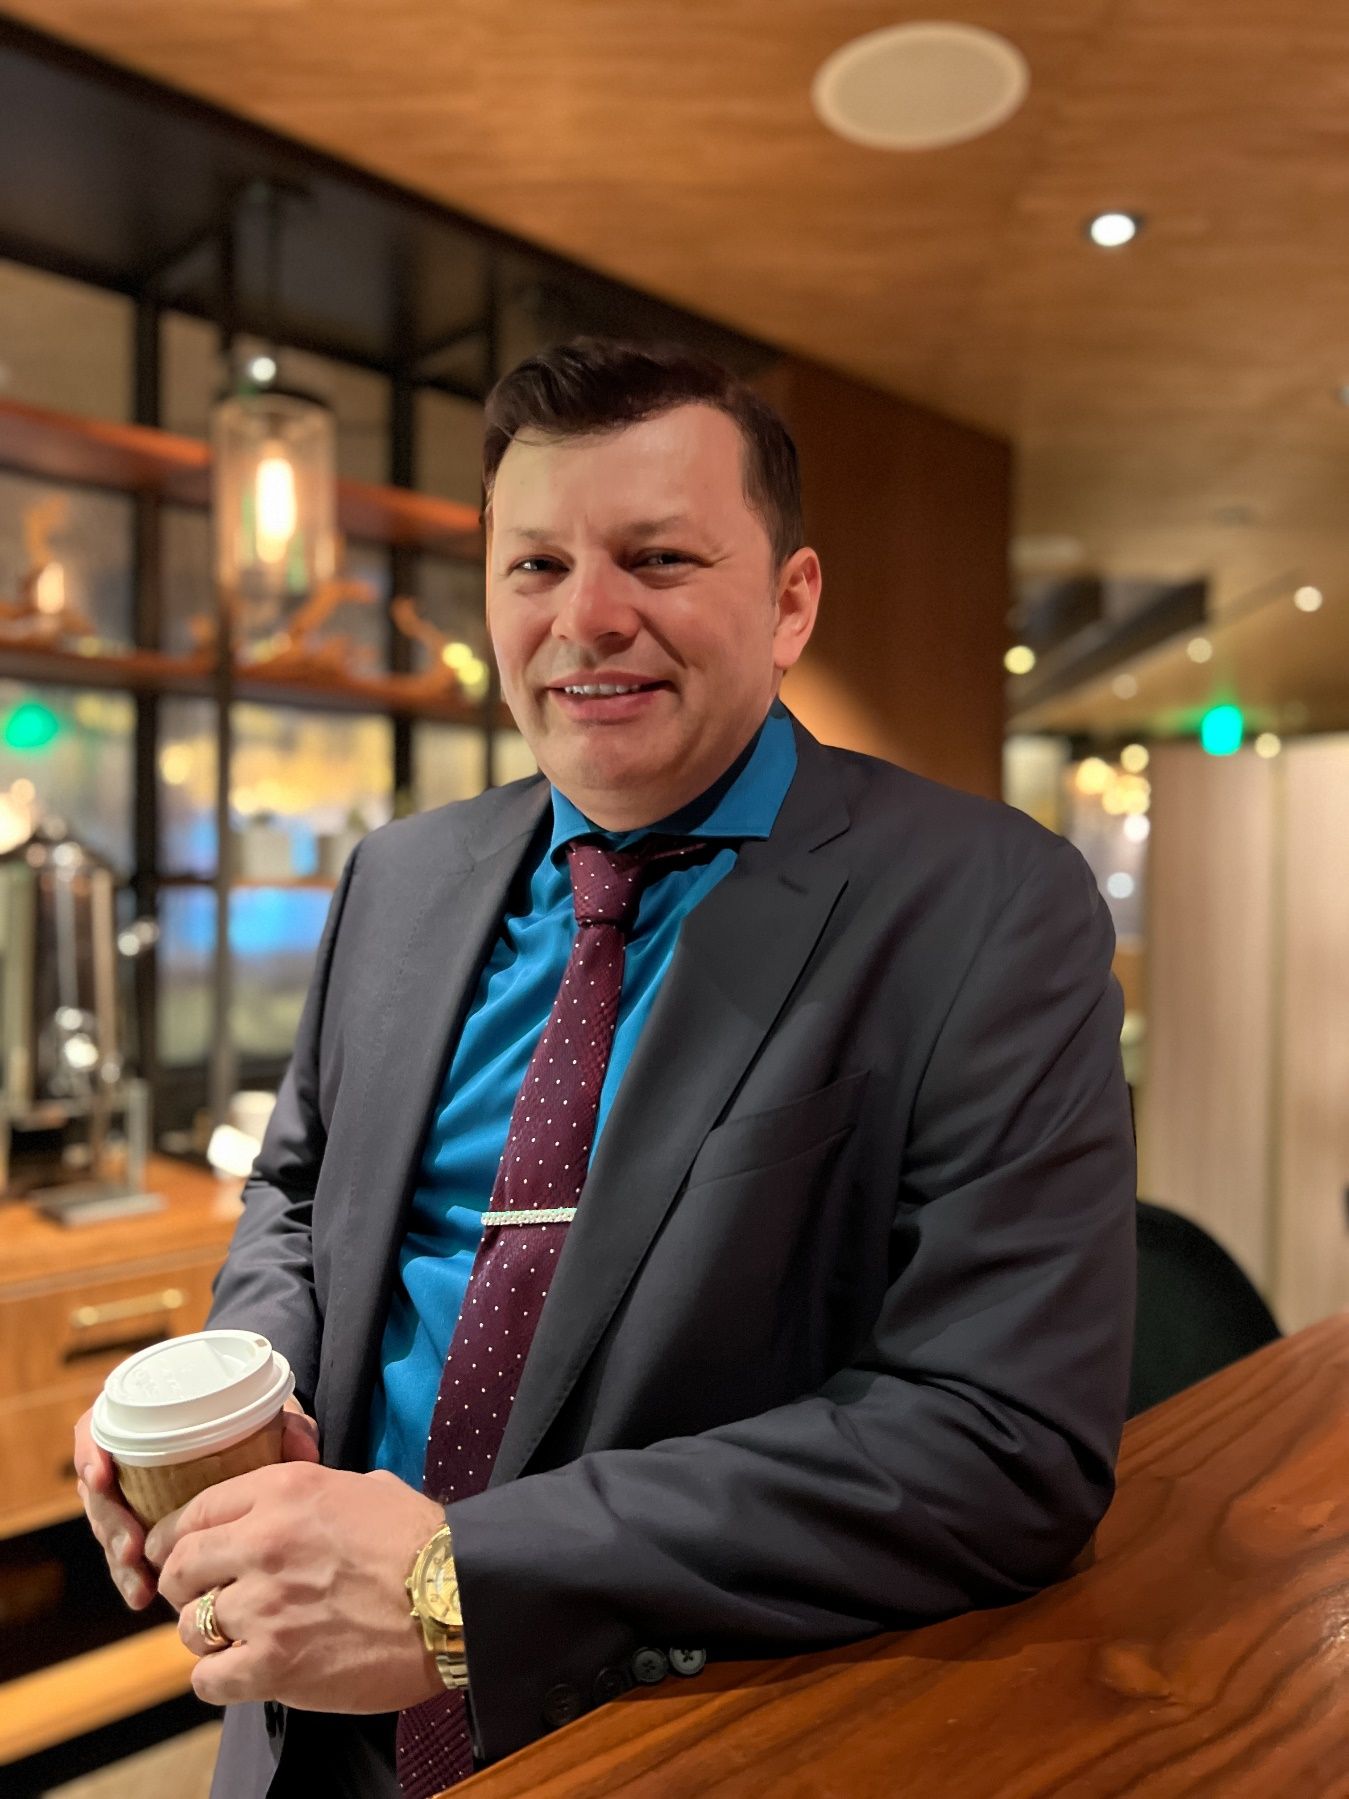 A person in a suit and tie holding a cup of coffee Description automatically generated